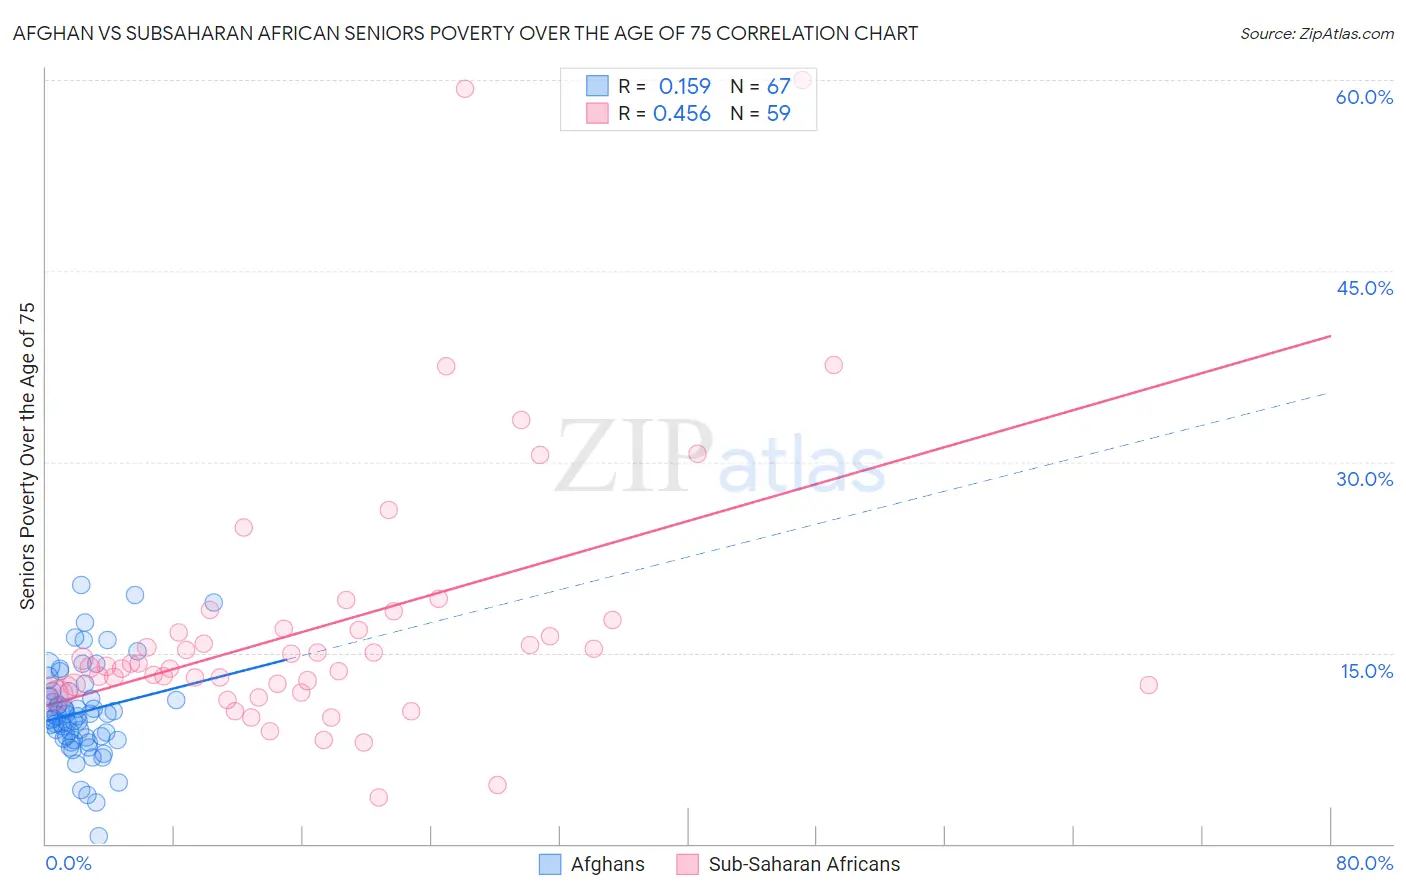 Afghan vs Subsaharan African Seniors Poverty Over the Age of 75